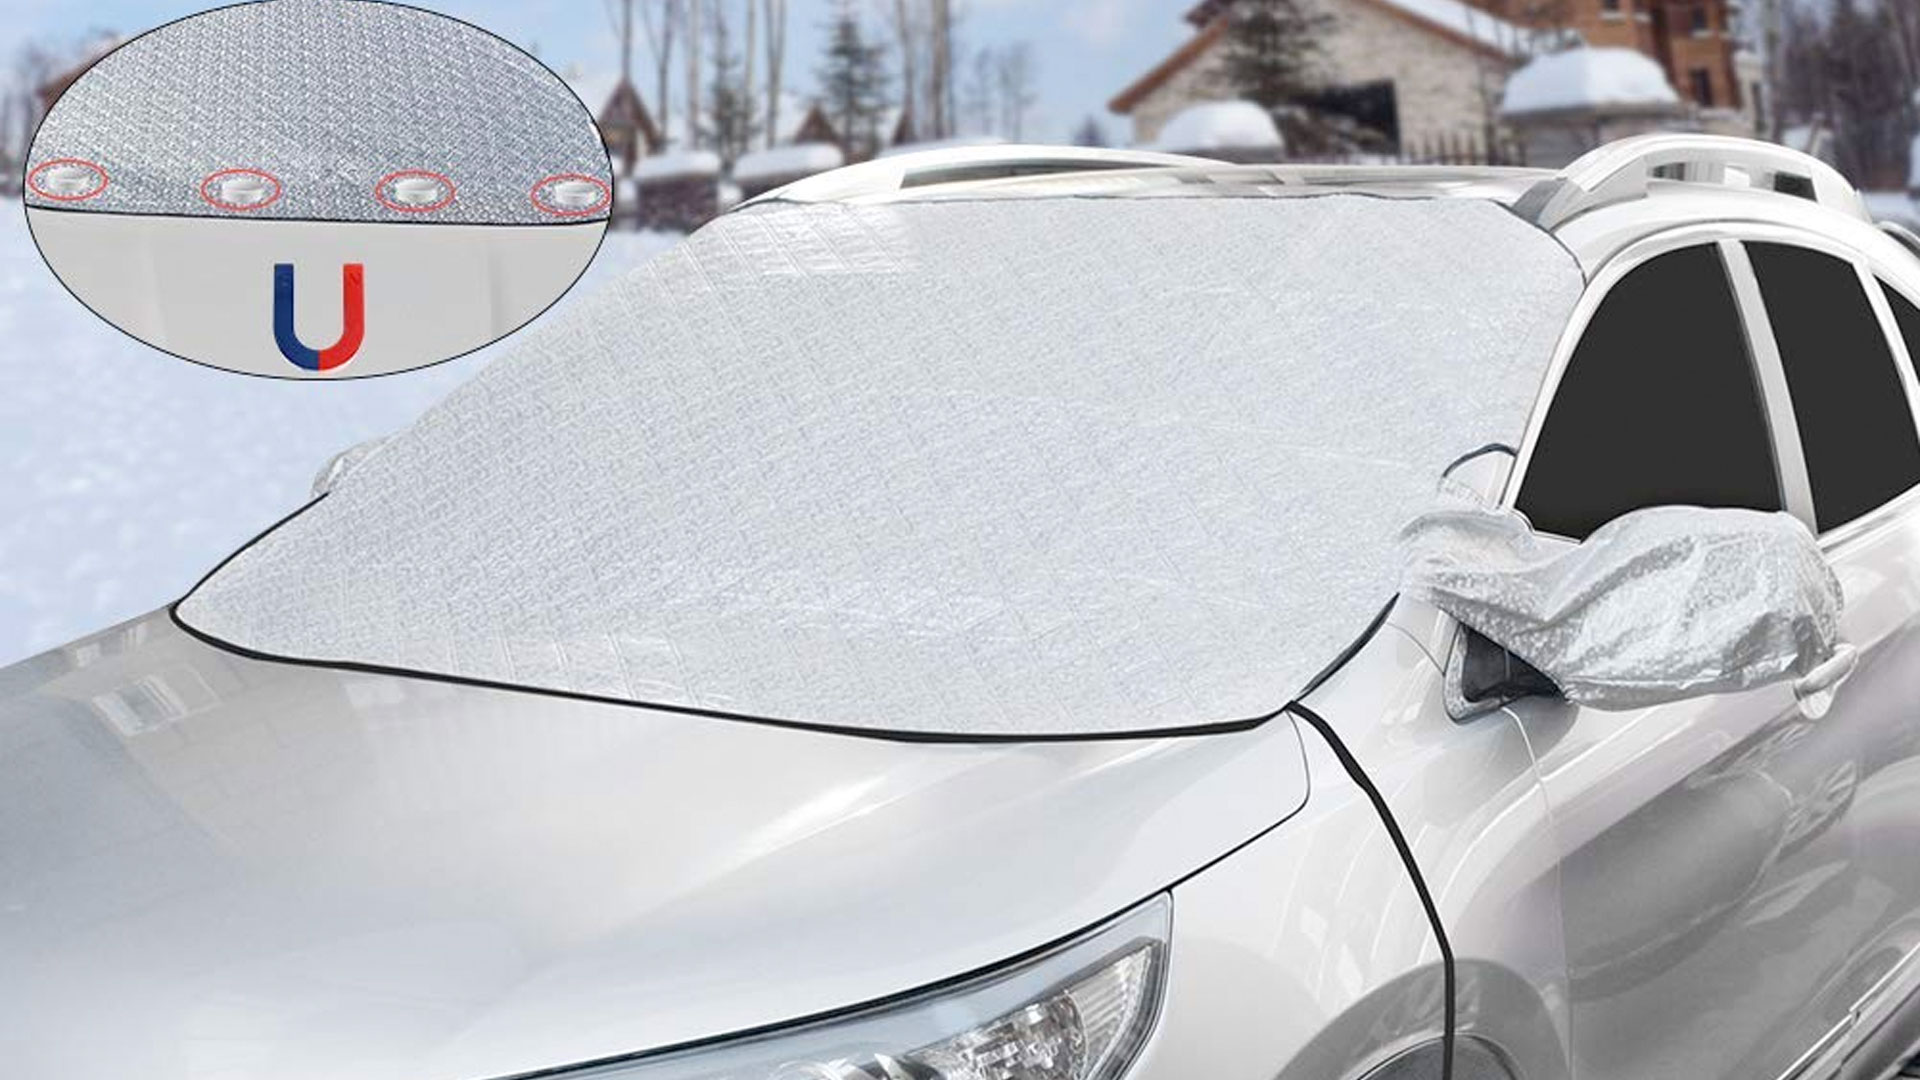 https://9to5toys.com/wp-content/uploads/sites/5/2019/12/Car-Windshield-Snow-Cover.jpg